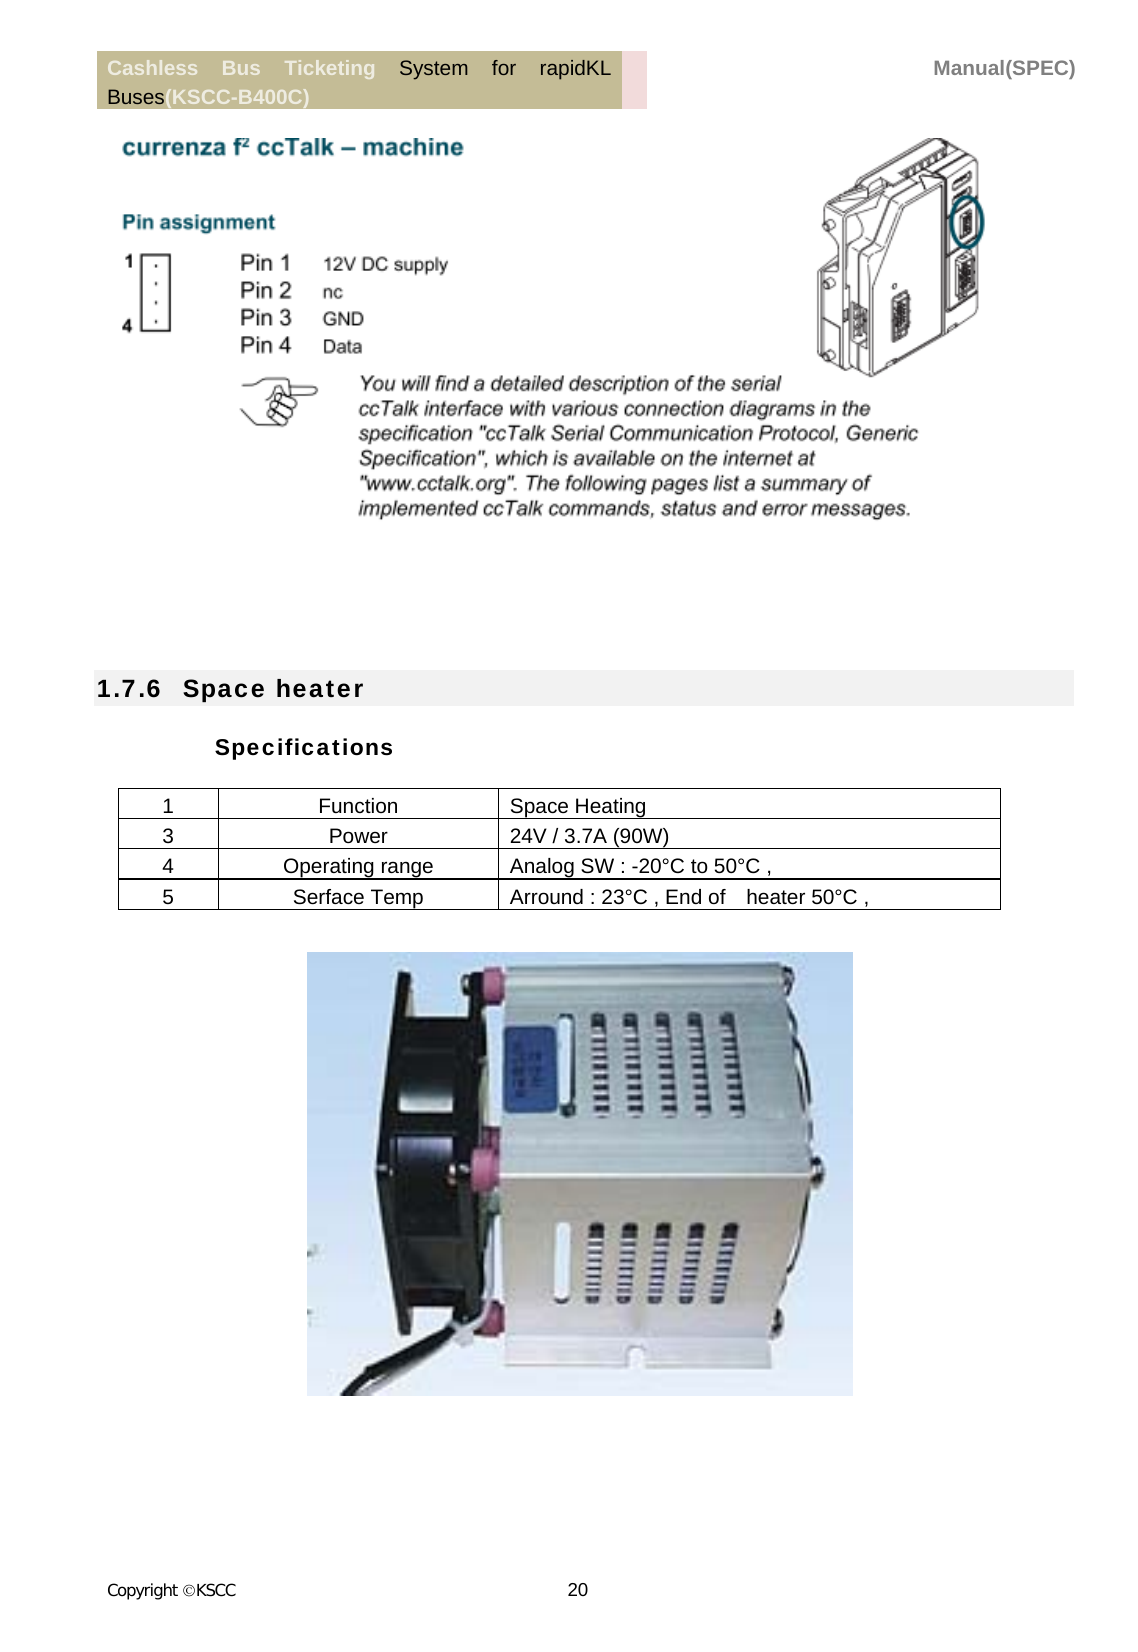 Cashless Bus Ticketing System for rapidKL Buses(KSCC-B400C)  Manual(SPEC) Copyright KSCC 20         1.7.6   Space heater Specifications 1 Function Space Heating 3  Power  24V / 3.7A (90W) 4  Operating range  Analog SW : -20°C to 50°C , 5  Serface Temp  Arround : 23°C , End of    heater 50°C ,                      